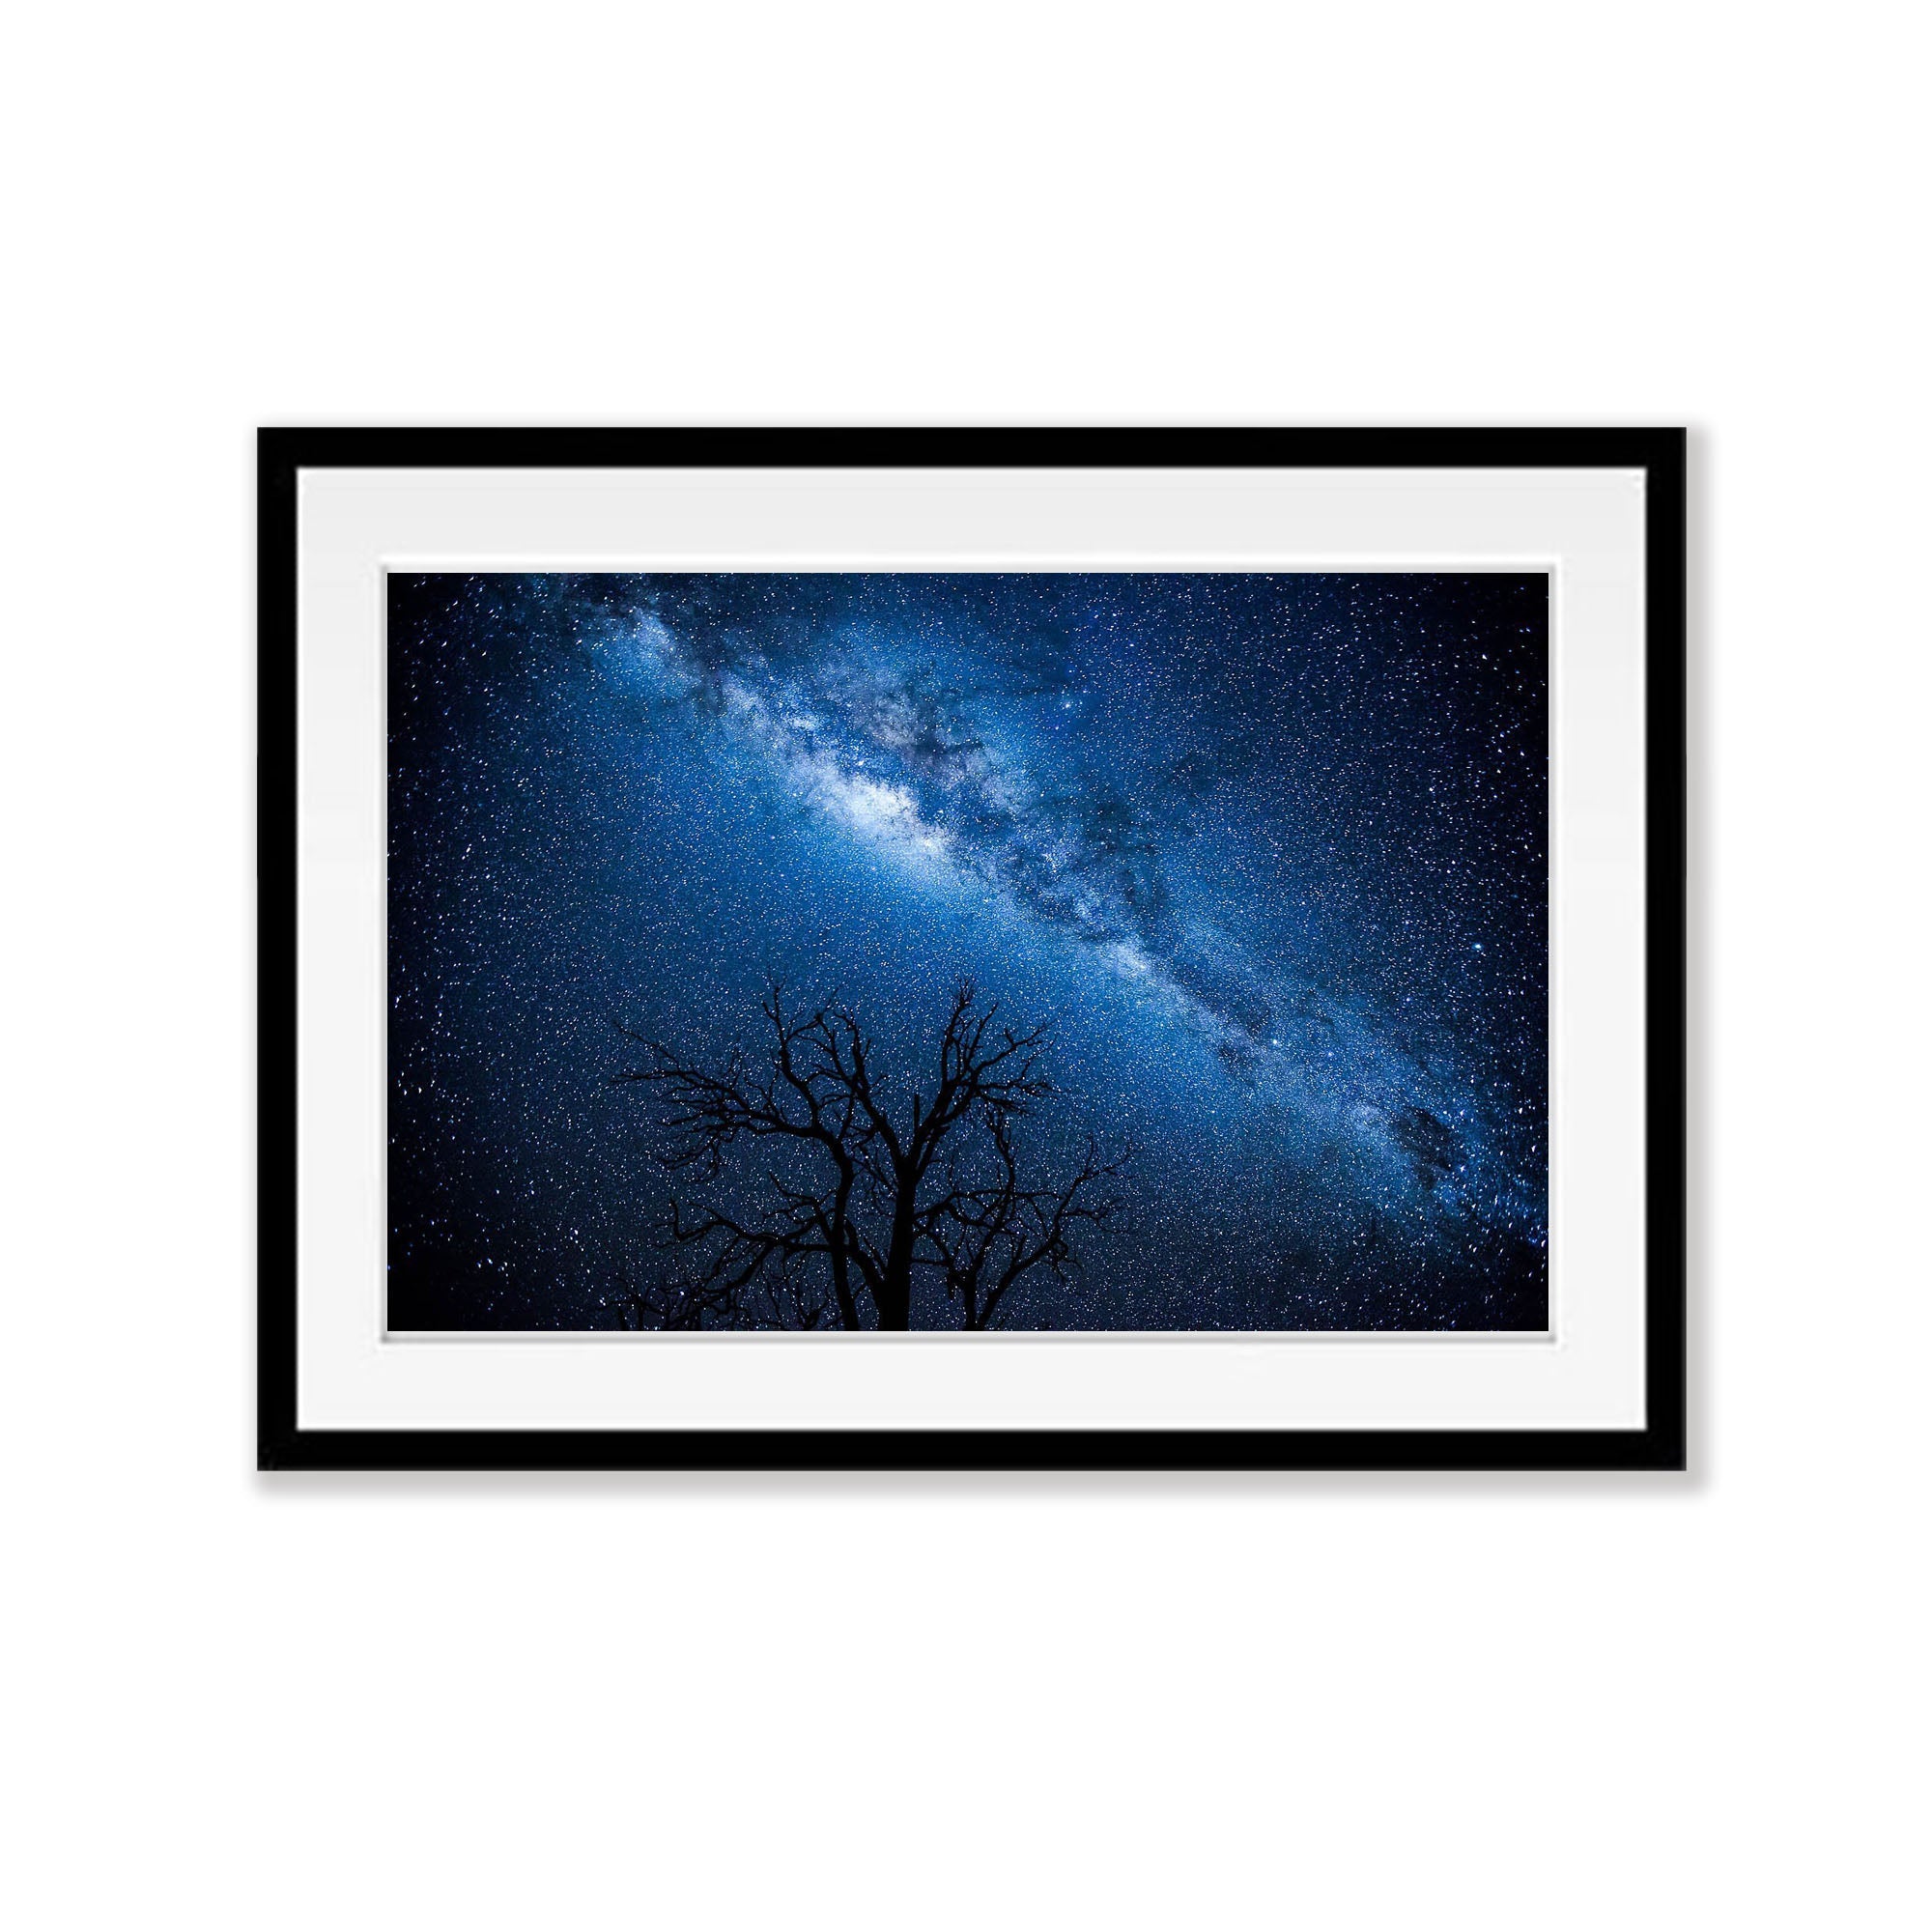 Milky Way, West MacDonnell Ranges - Northern Territory